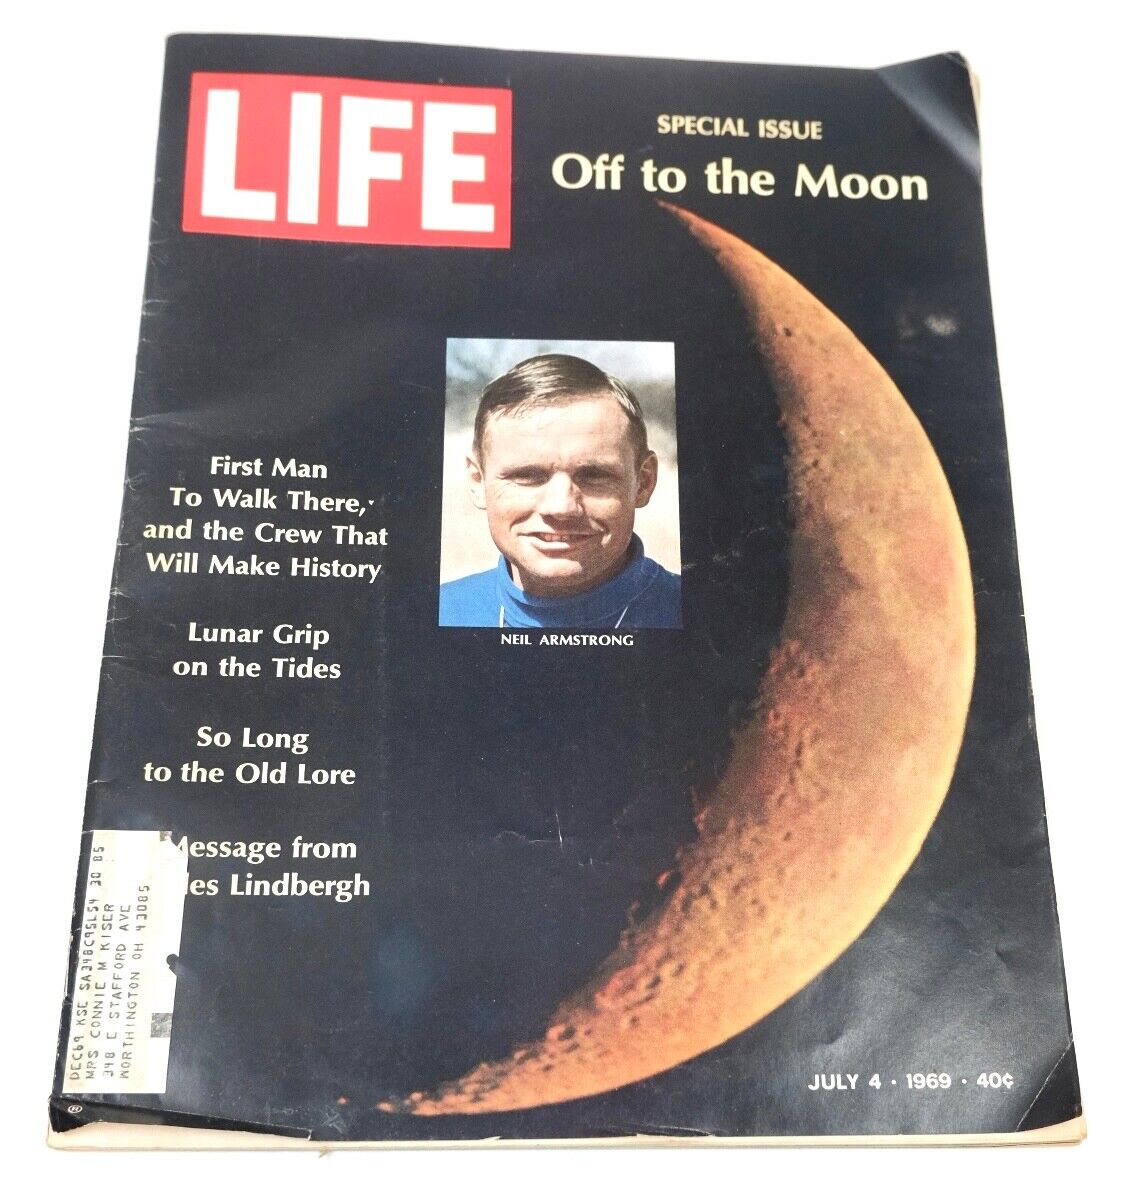 VINTAGE 1969 LIFE MAGAZINE~OFF TO THE MOON ISSUE